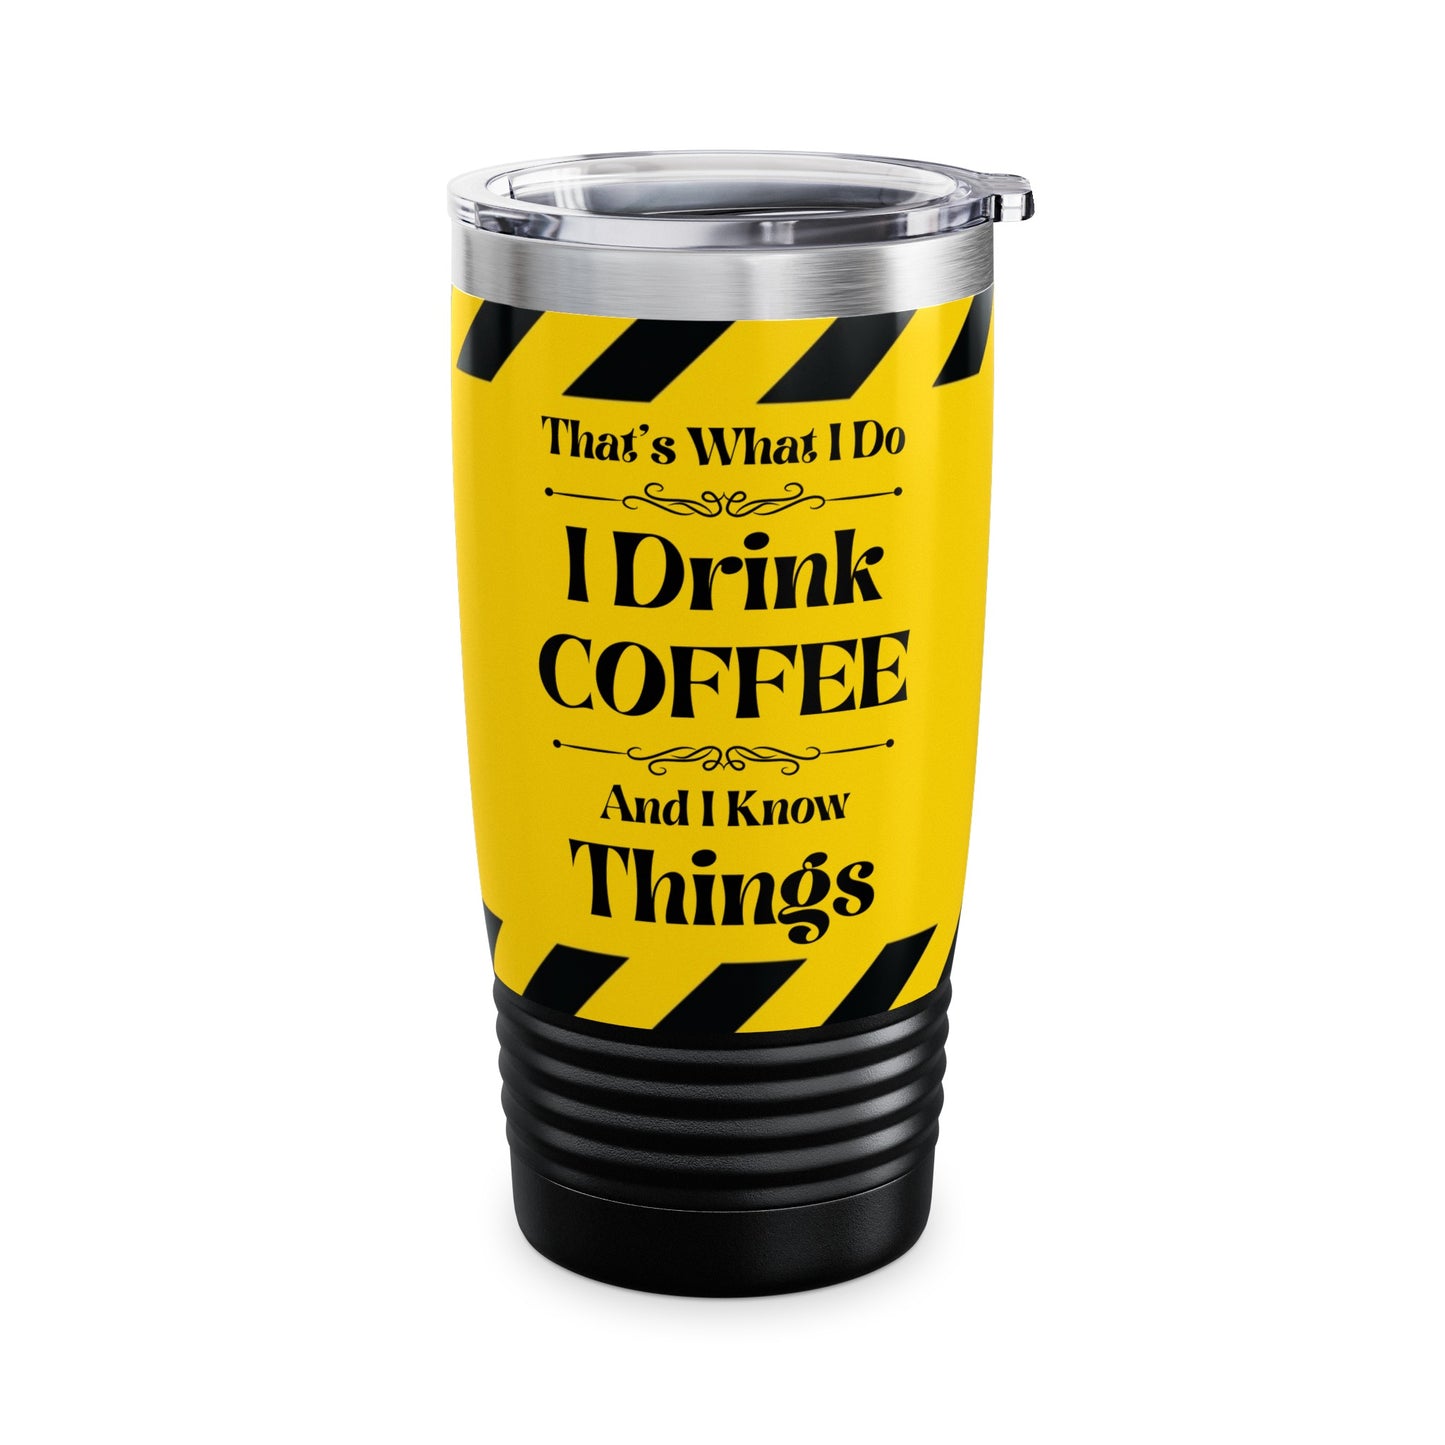 Caution, I Drink Coffee and I Know Things - Ringneck Tumbler, 20oz